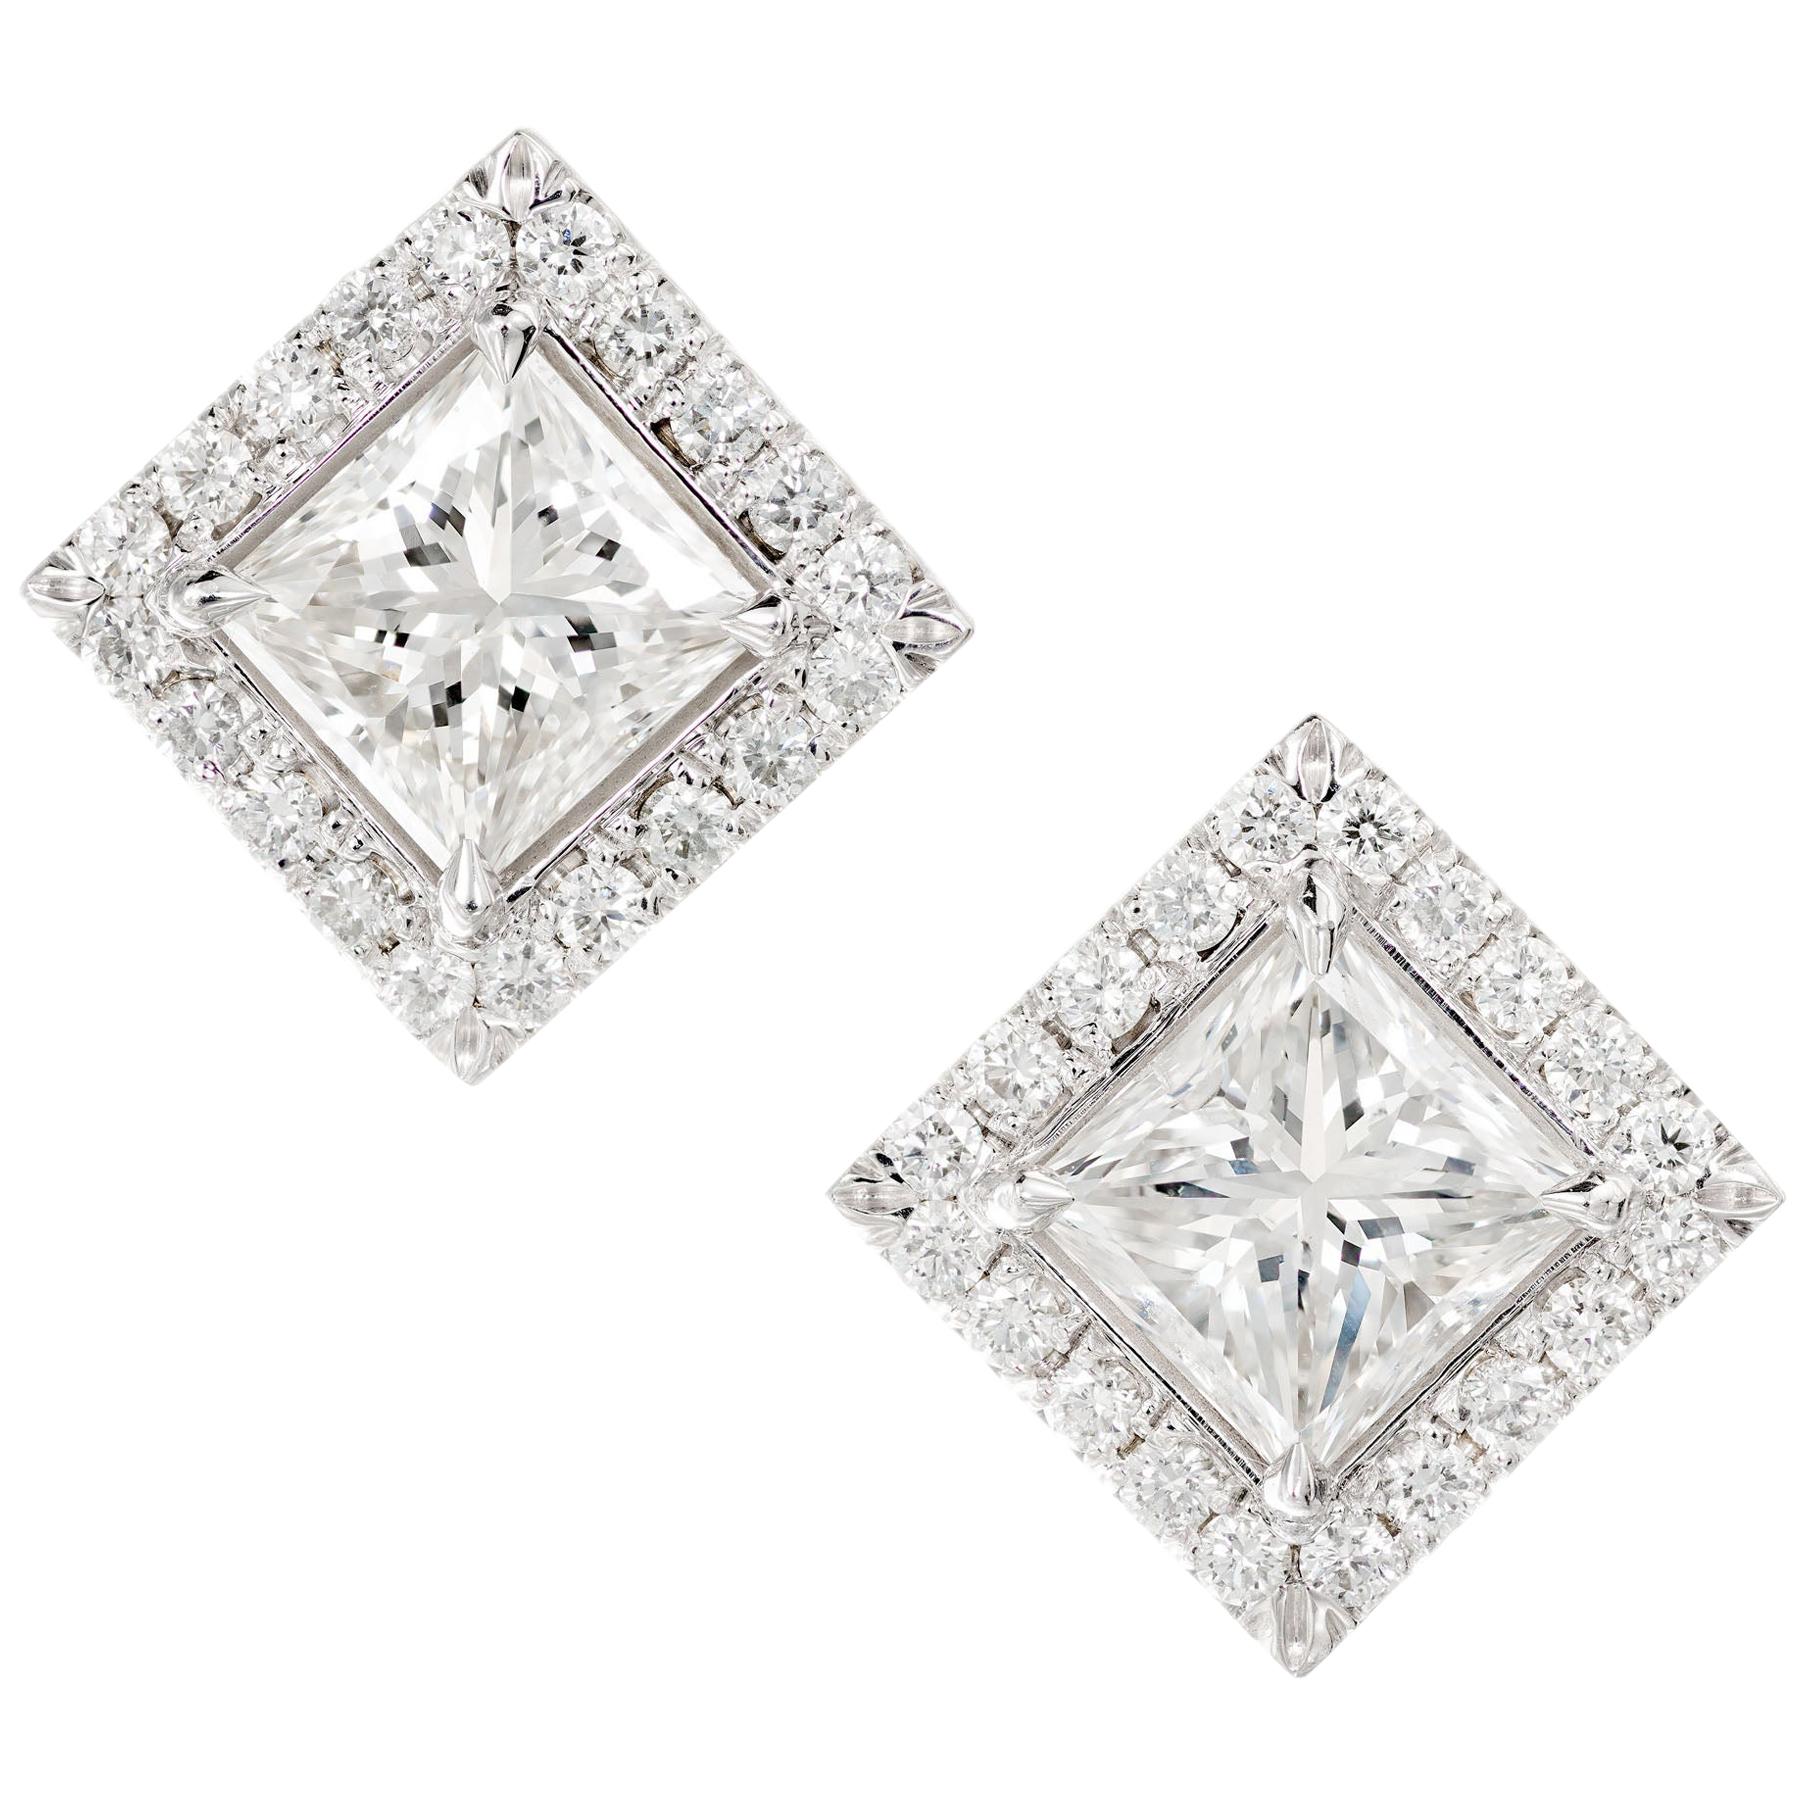 Peter Suchy GIA EGL Certified 2.67 Carat Diamond White Gold Halo Earrings